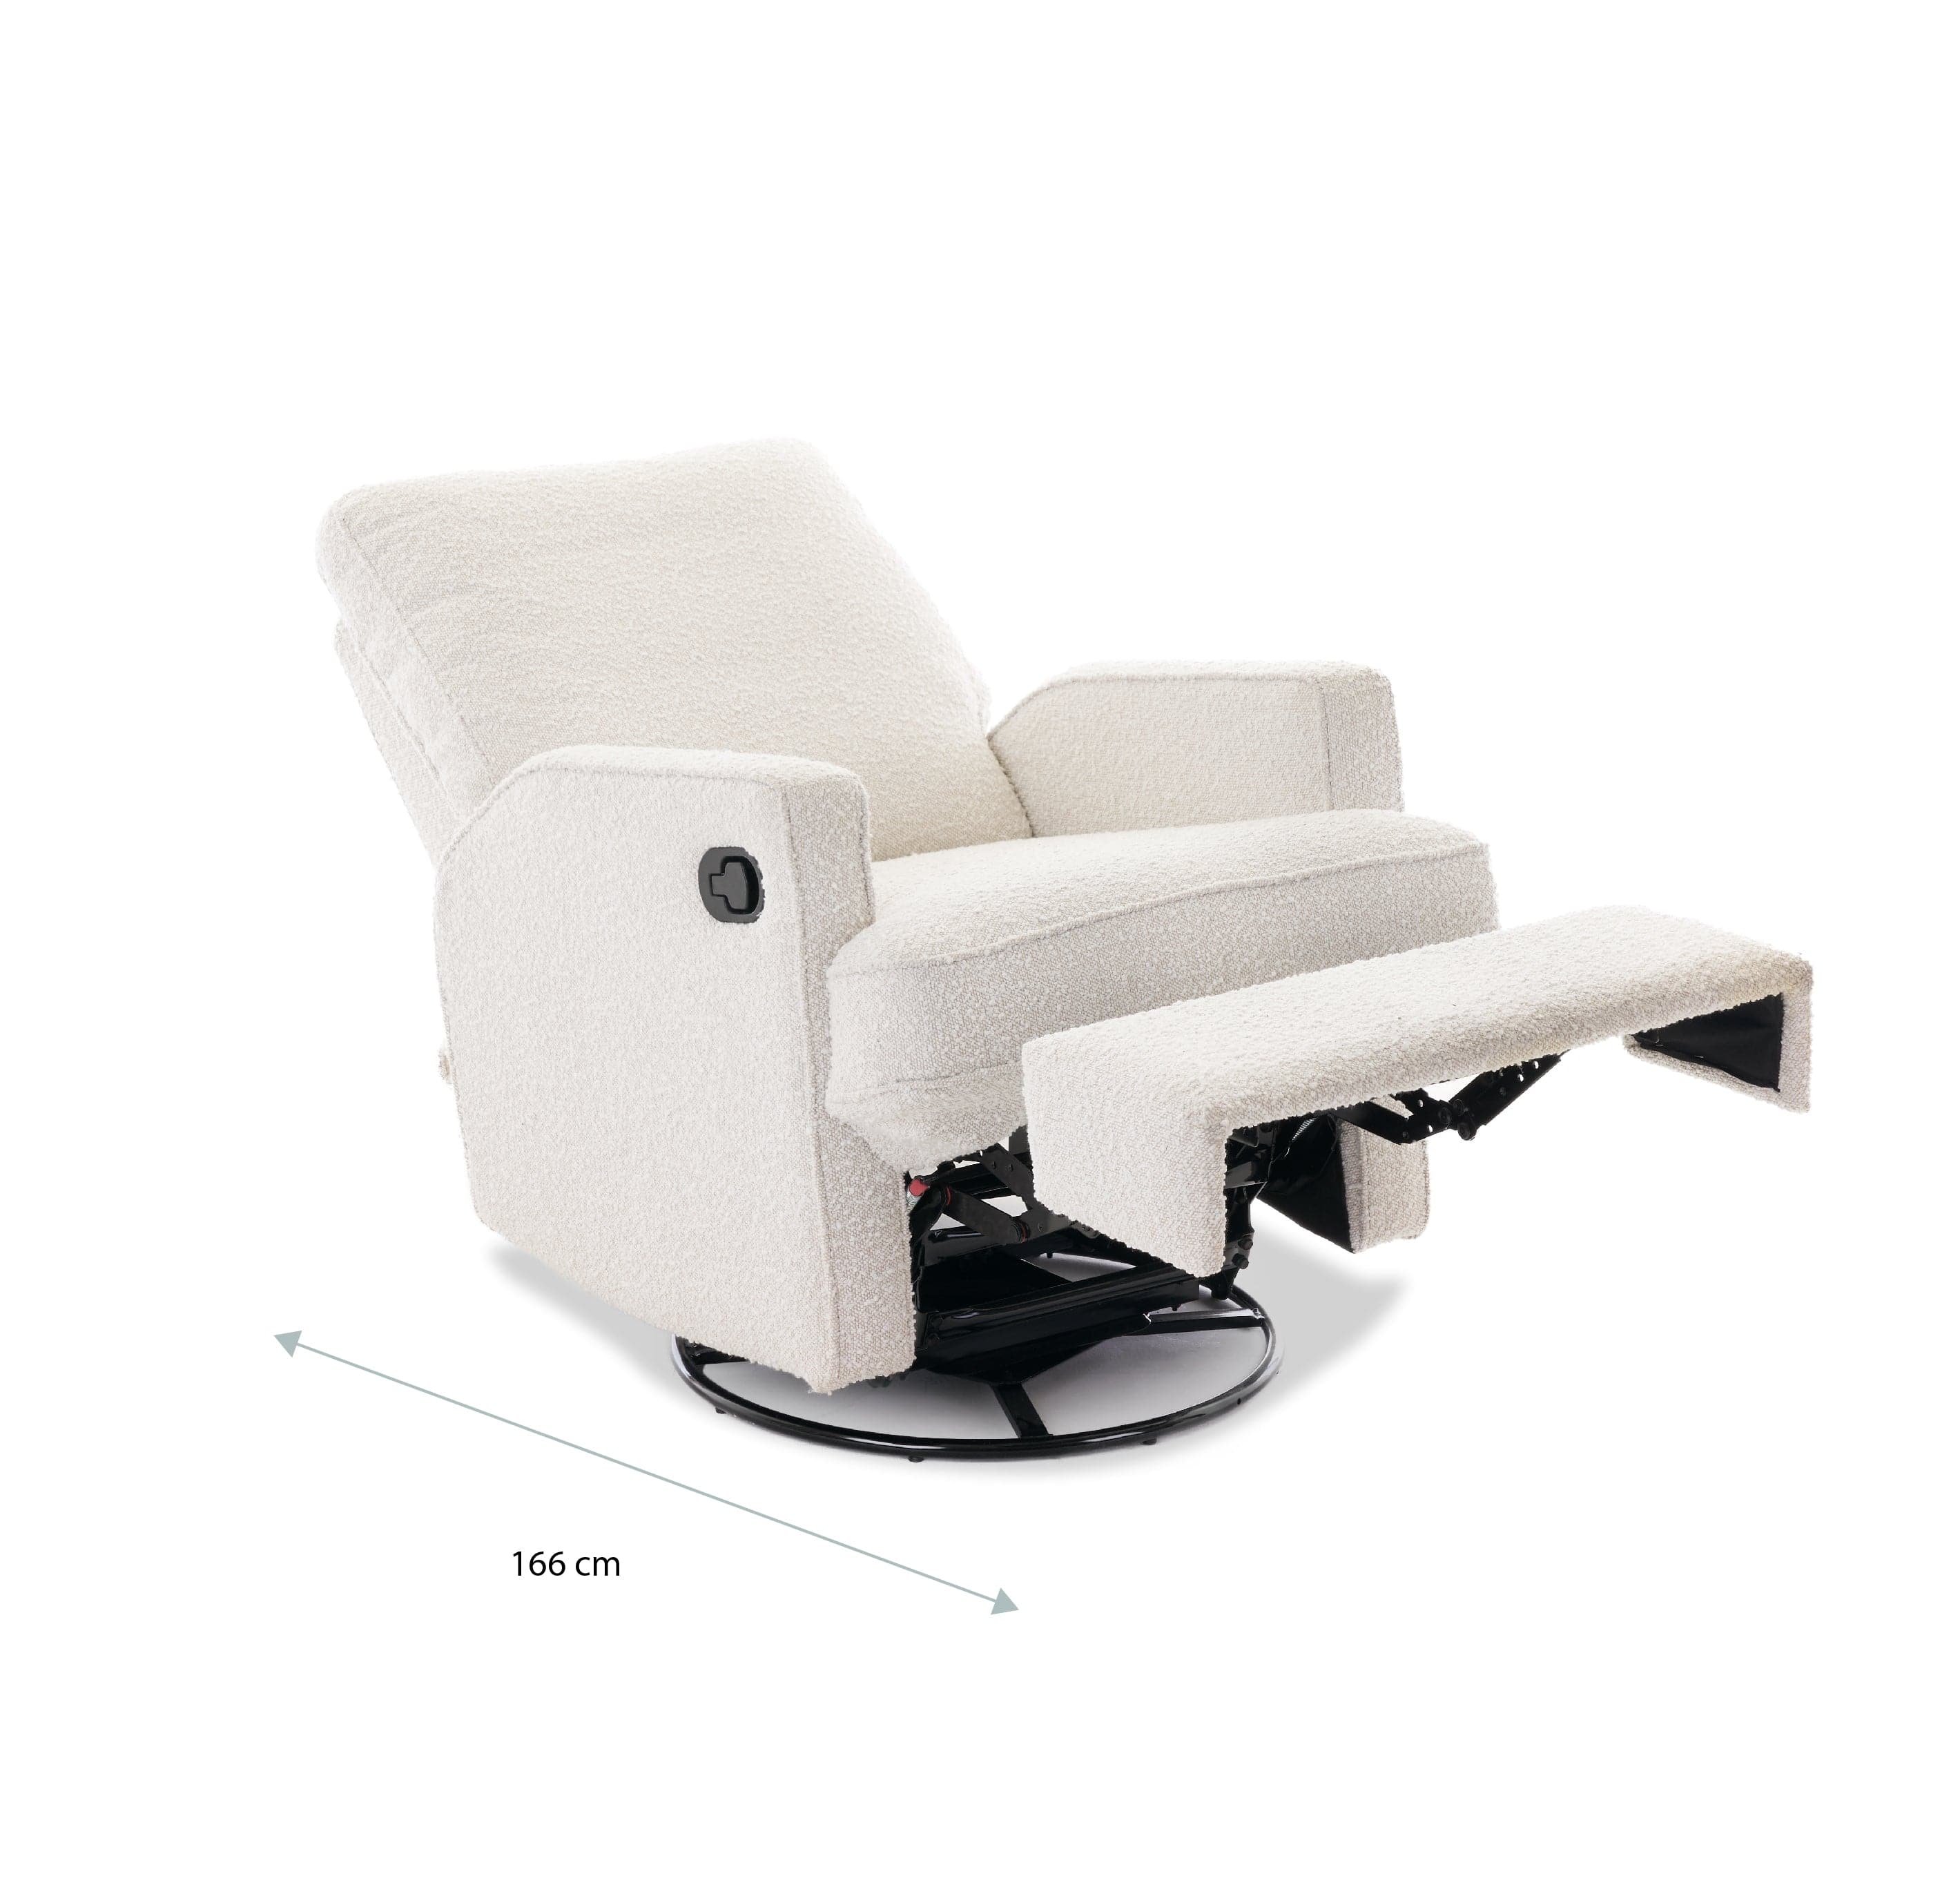 Obaby Nursery Furniture Obaby Madison Swivel Glider Recliner Chair - Direct Delivery